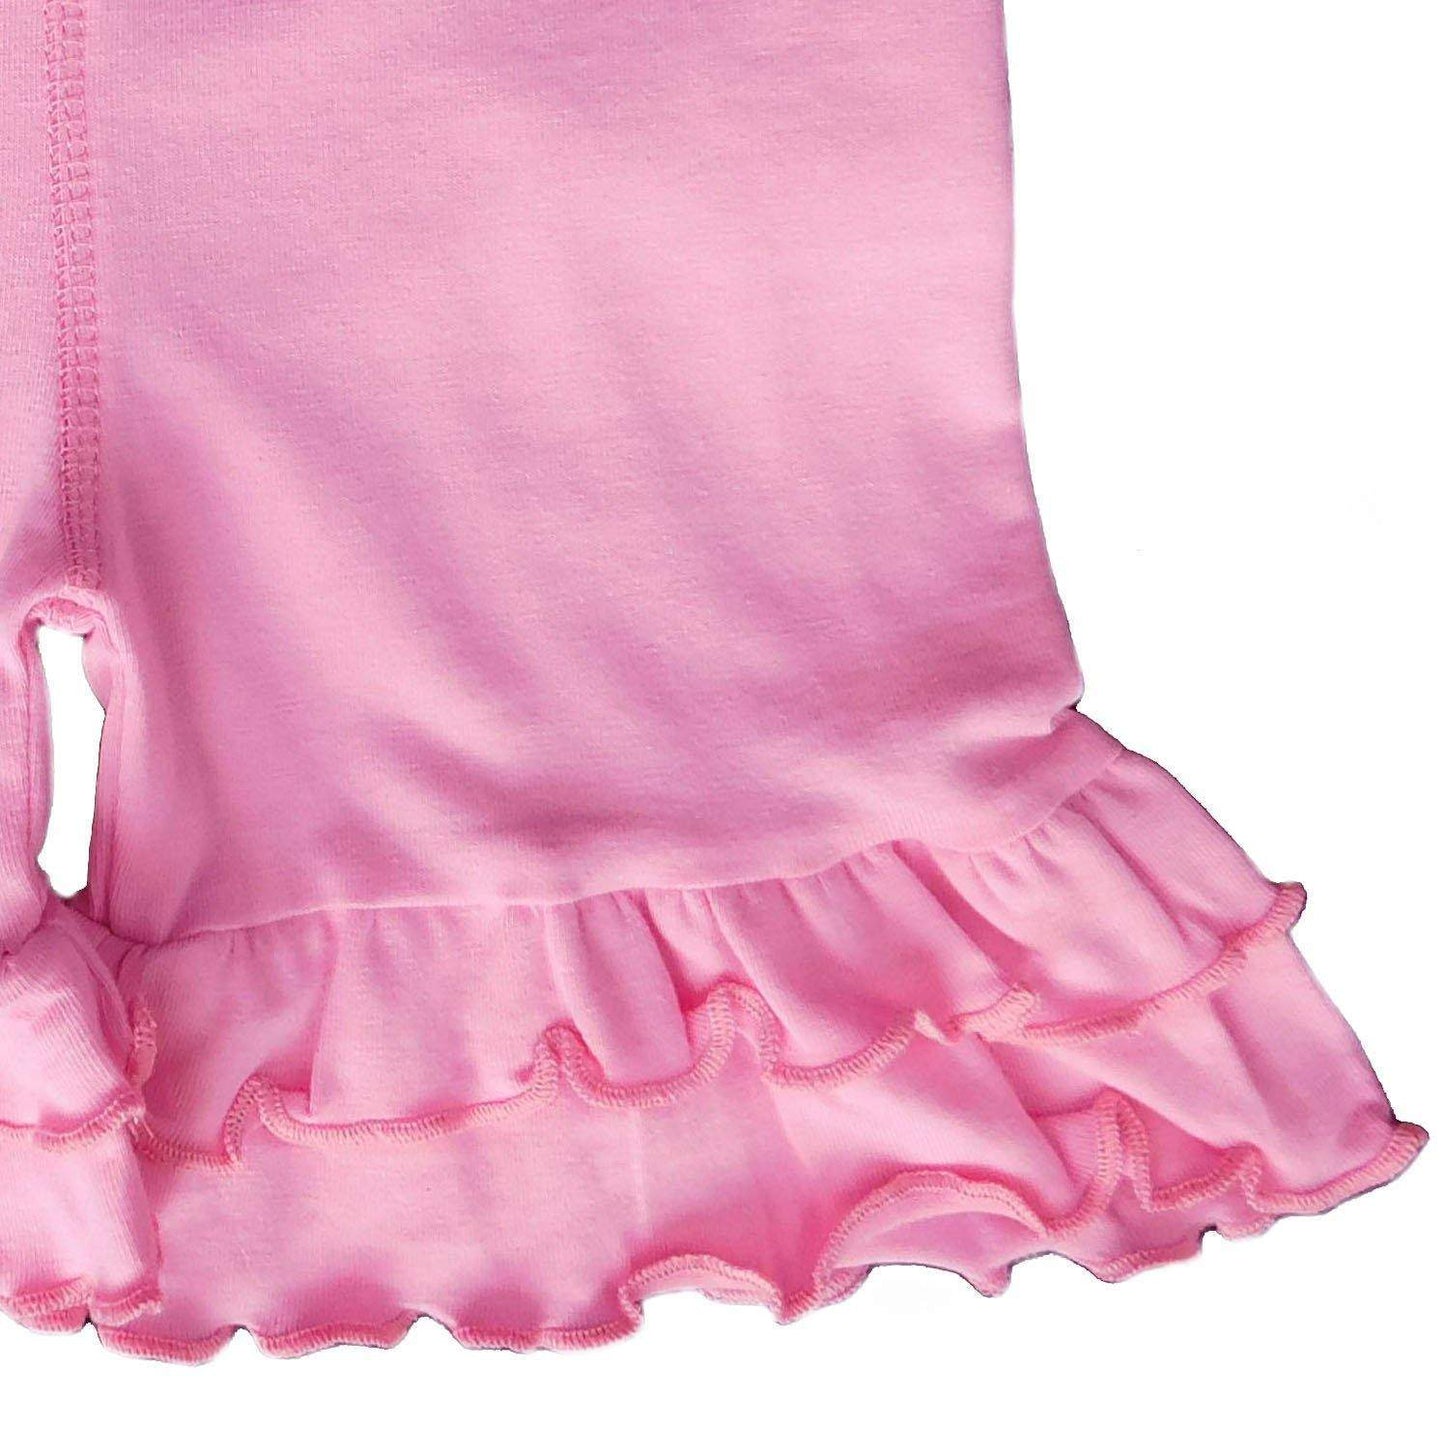 Pink Stretch Cotton Knit Ruffled Shorts 4-8Y-AnnLoren-4-5T,6,7-8,ANNLOREN,Pink,Shorts,Spring & Summer,Spring & Summer 2020